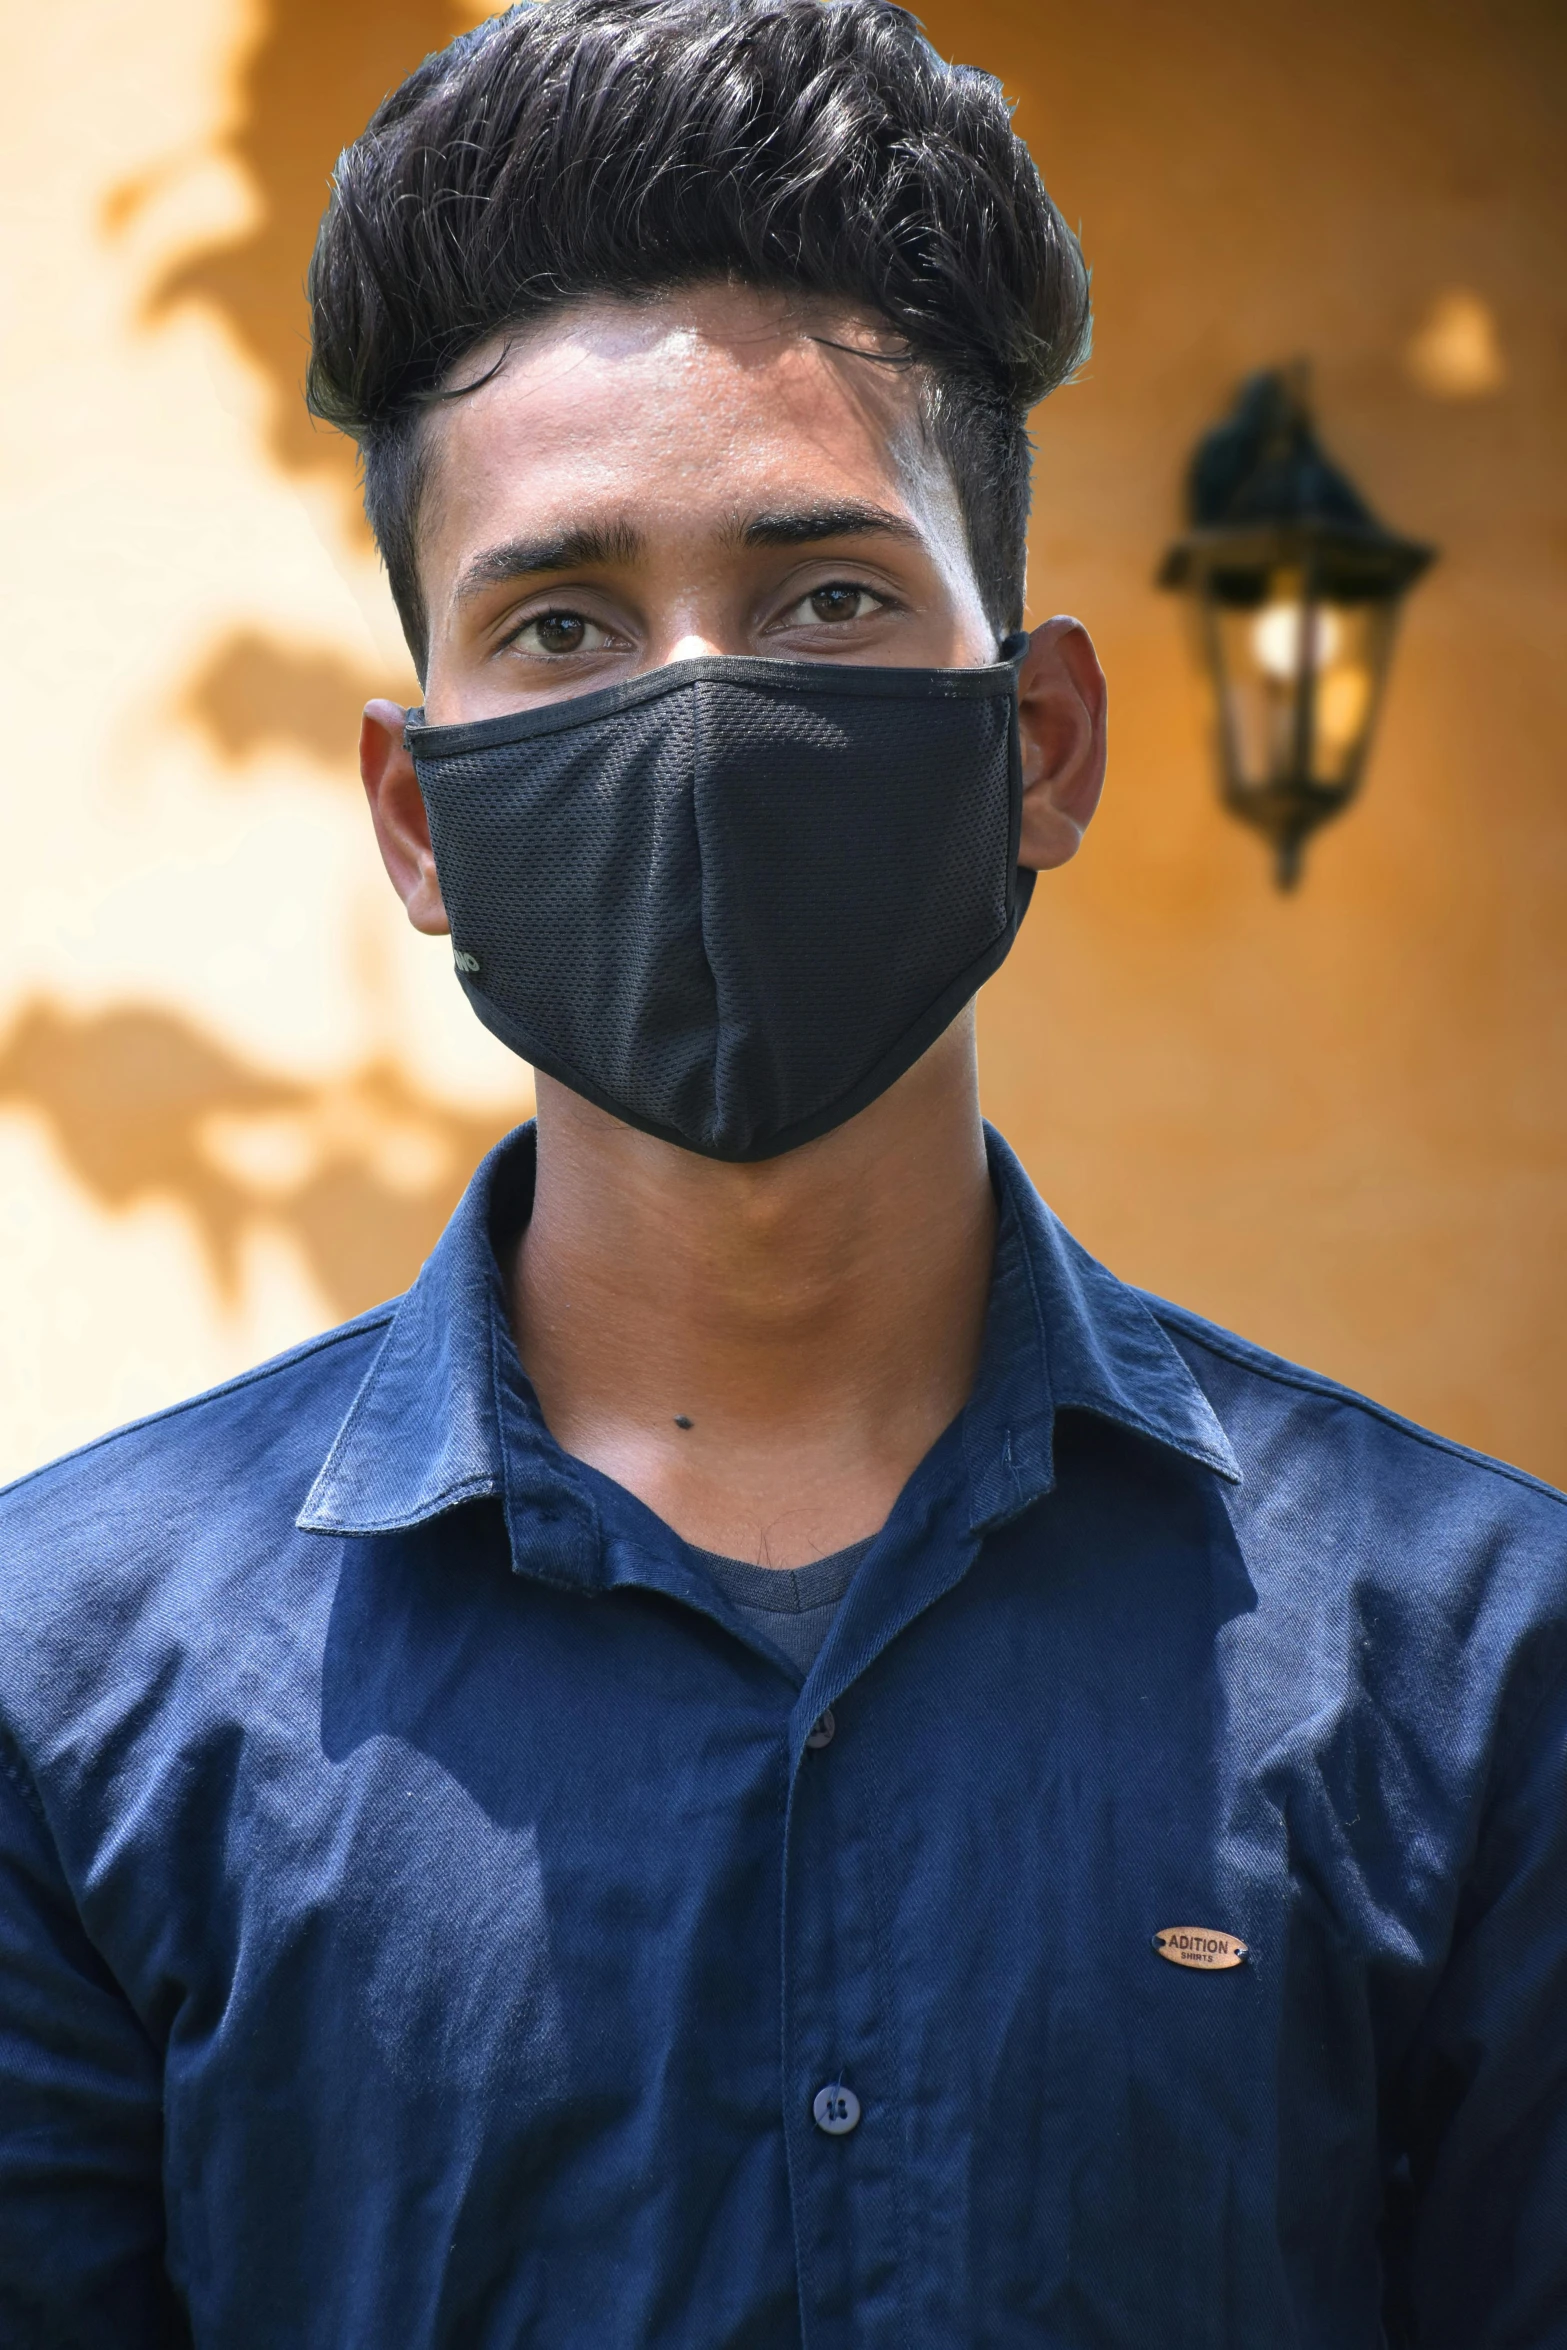 a man in a blue shirt wearing a black face mask, bangladesh, 1 6 years old, featured face details, wearing a black tshirt